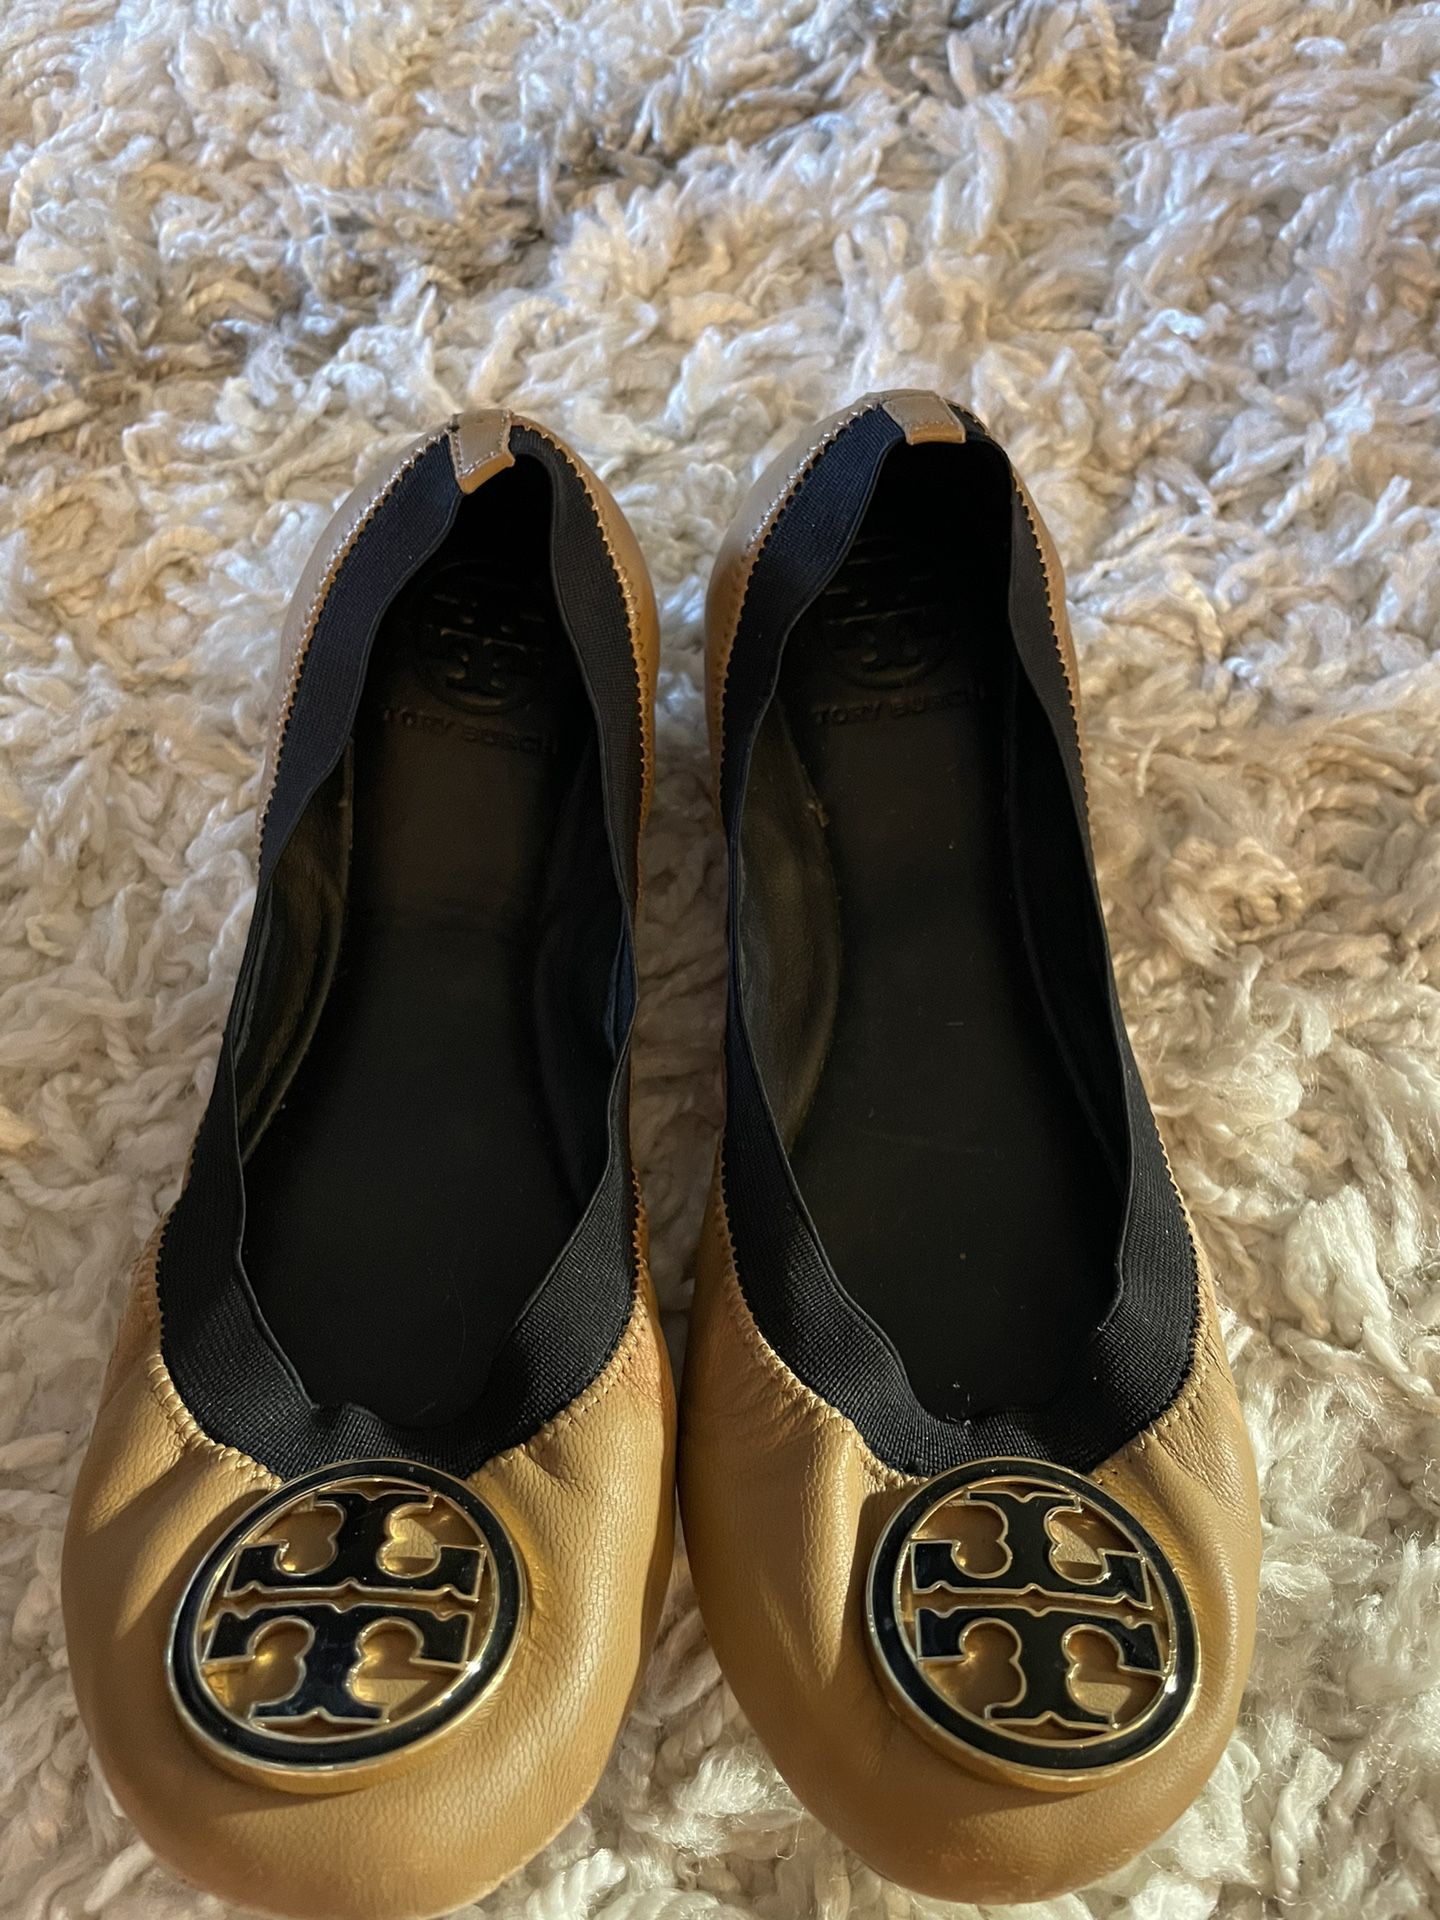 Tory Burch Shoes for Sale in Rye, NY - OfferUp